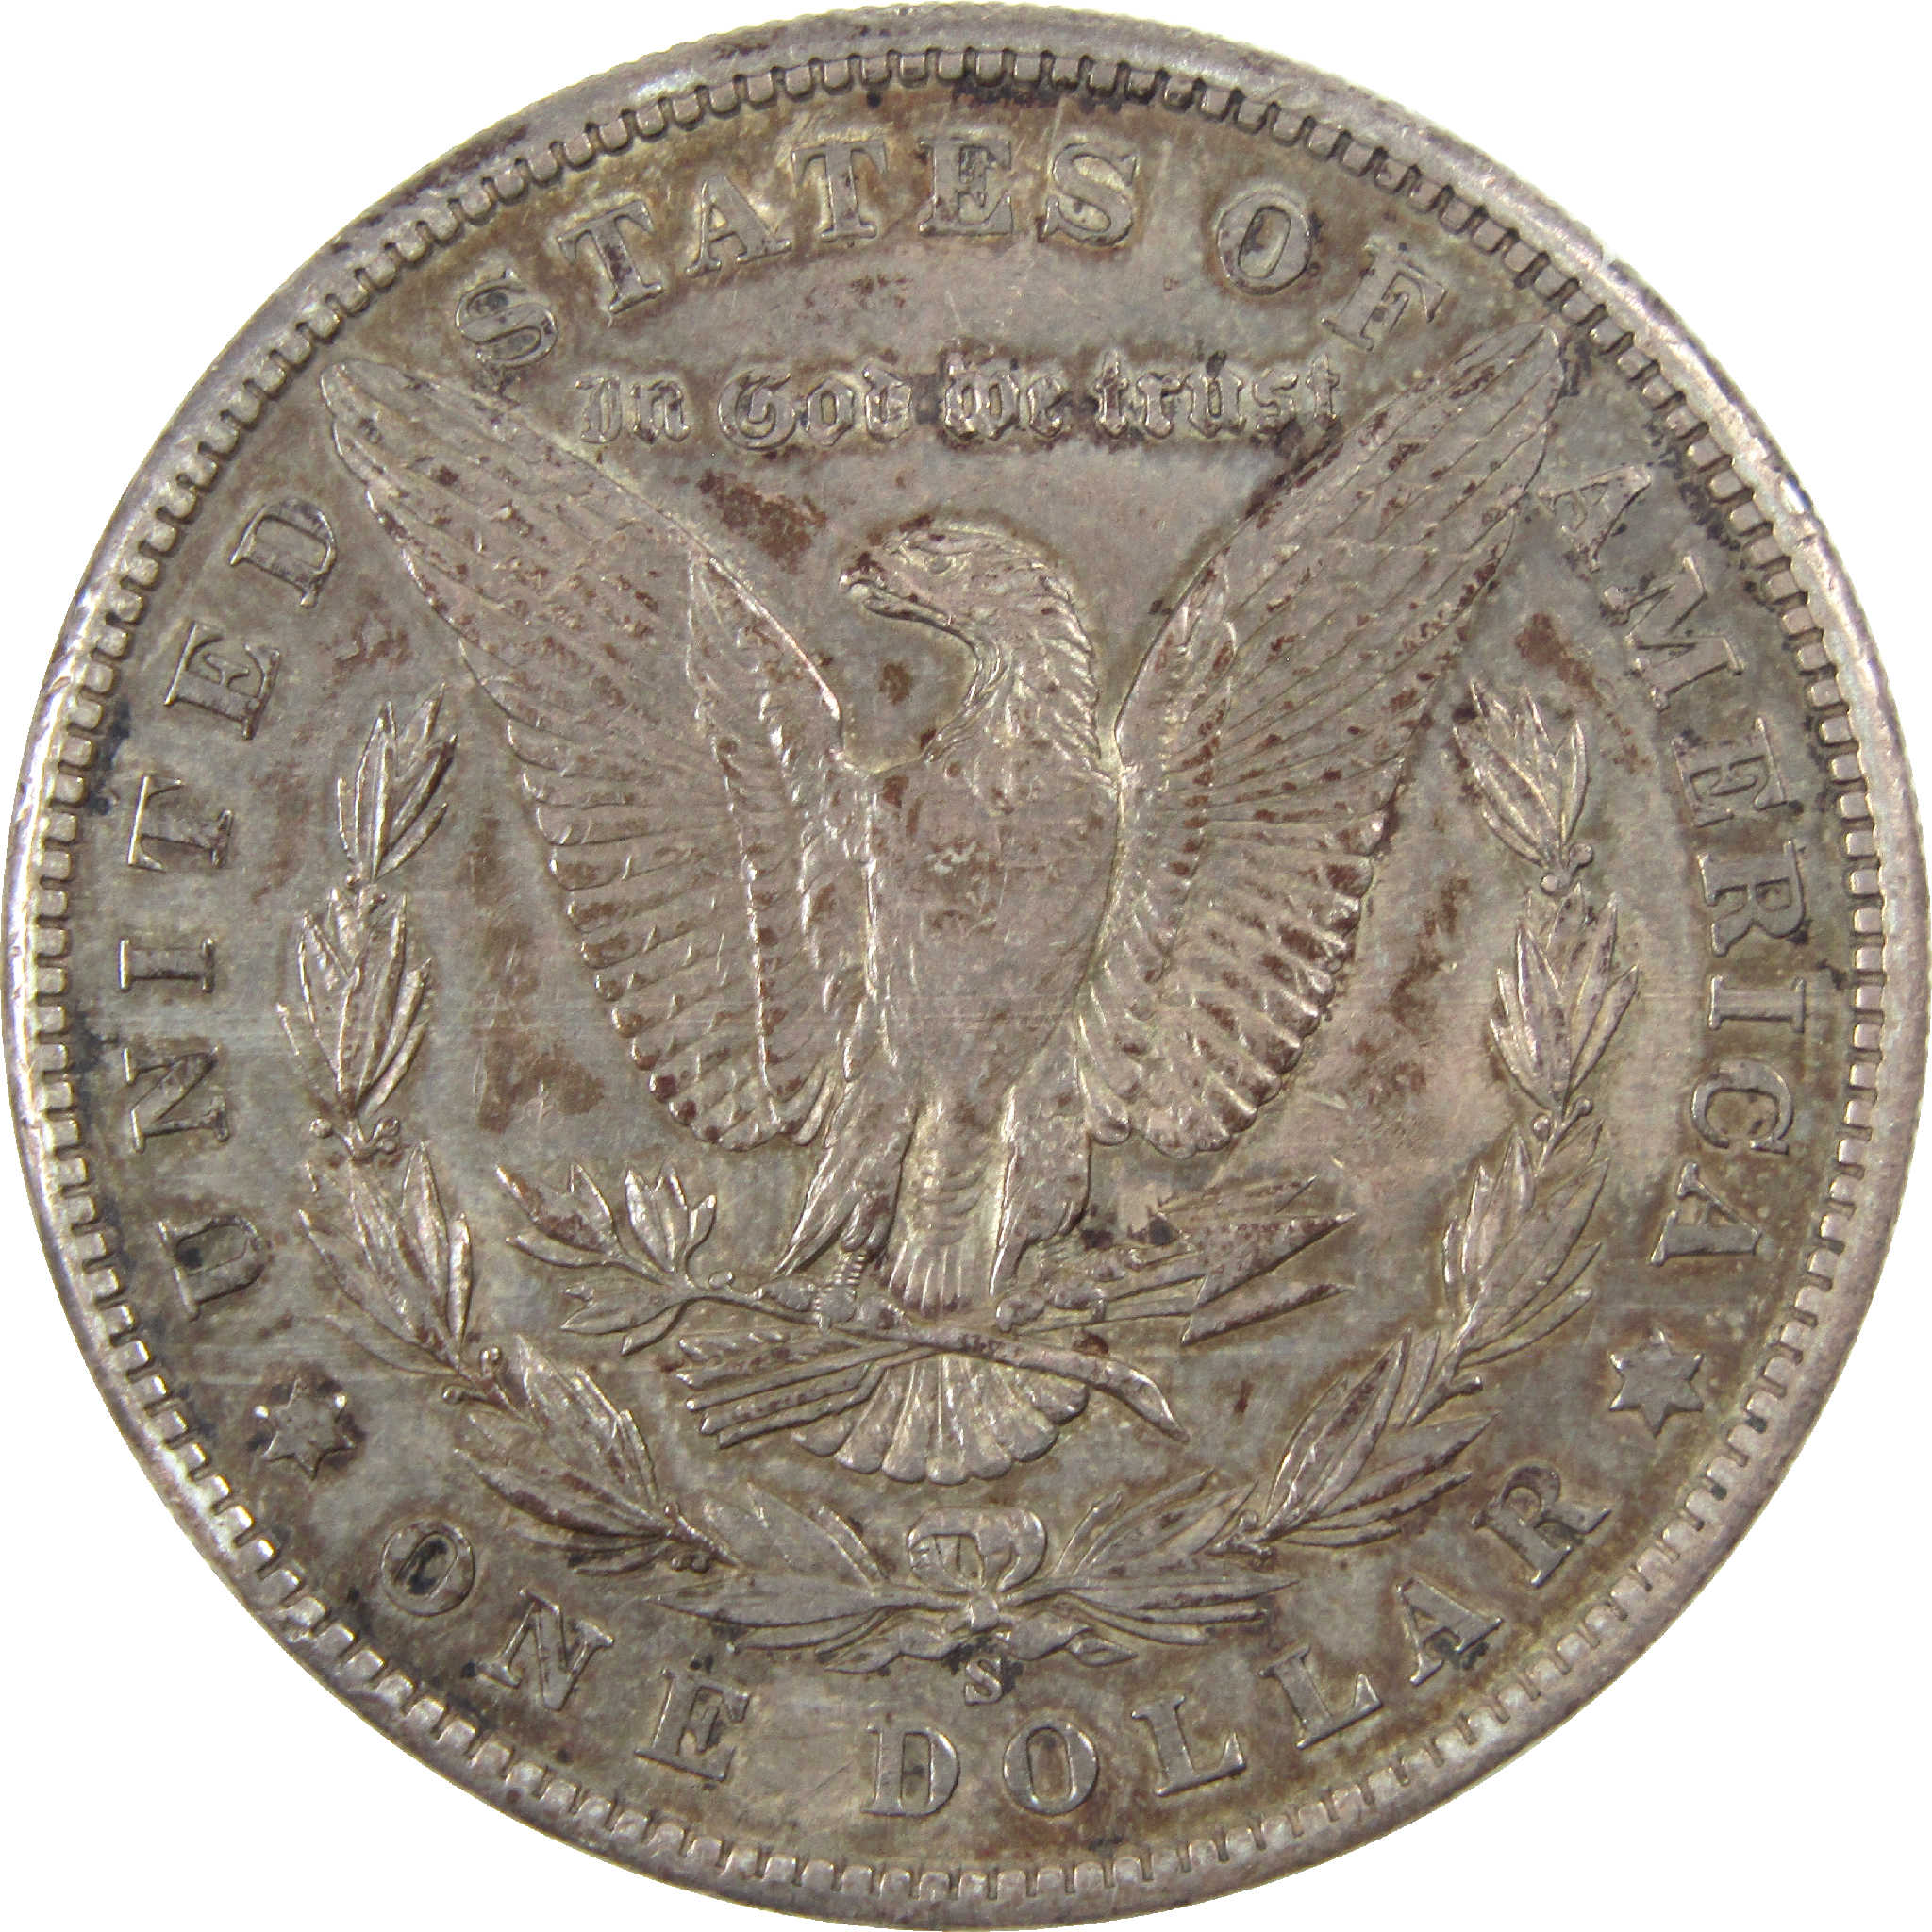 1900 S Morgan Dollar XF EF Extremely Fine Details Silver $1 SKU:I12239 - Morgan coin - Morgan silver dollar - Morgan silver dollar for sale - Profile Coins &amp; Collectibles